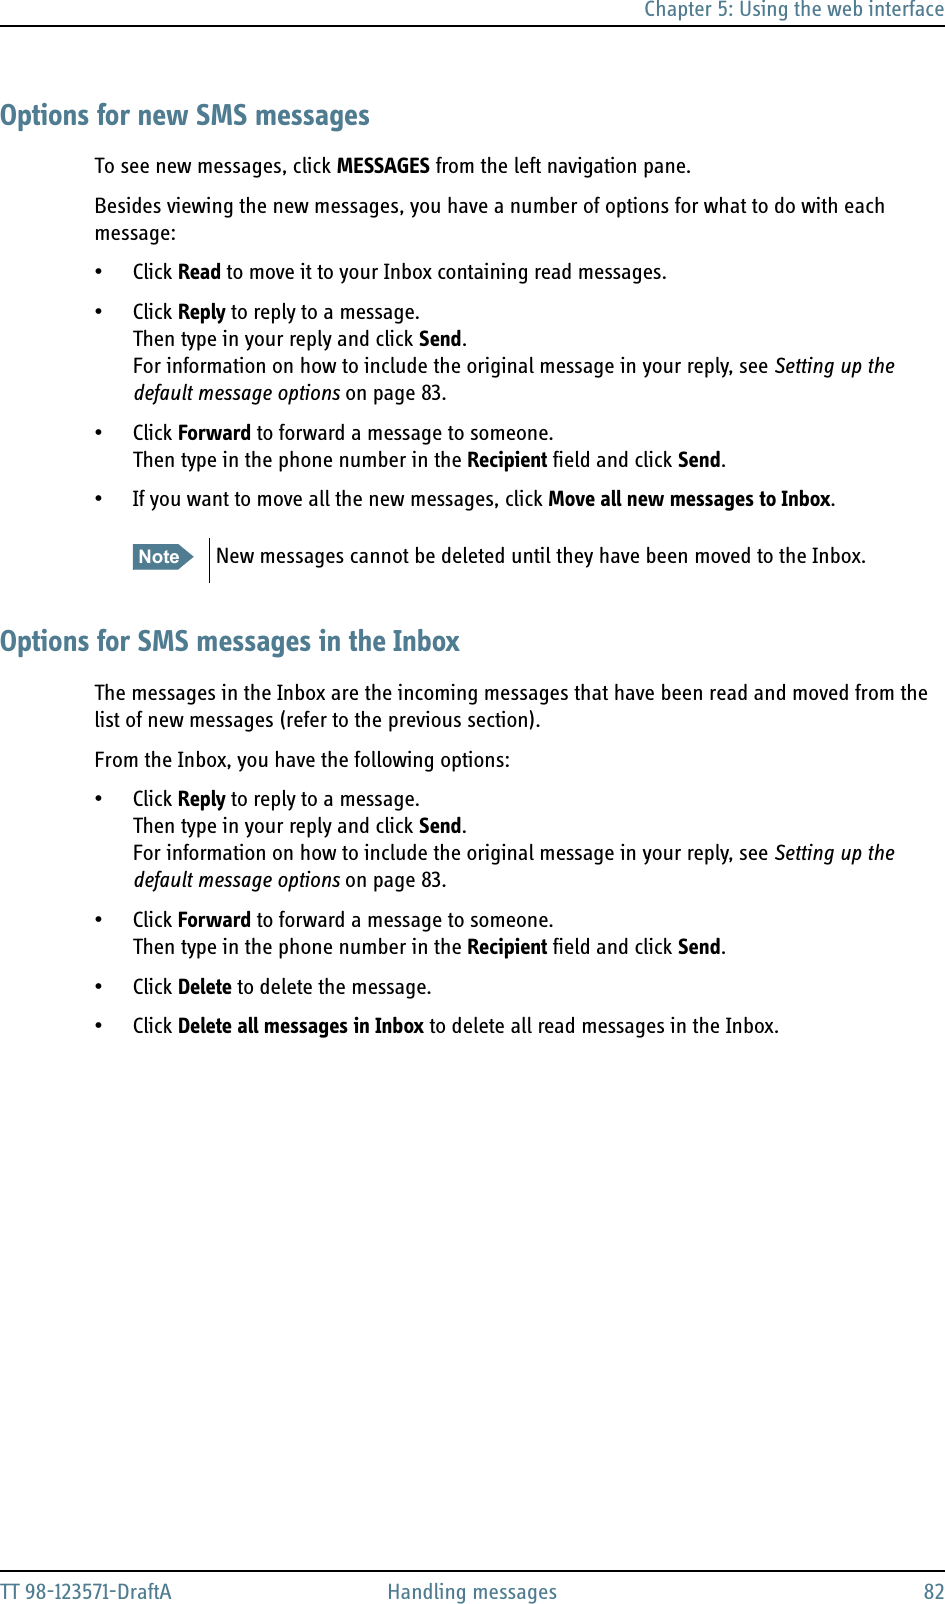 Chapter 5: Using the web interfaceTT 98-123571-DraftA Handling messages 82Options for new SMS messagesTo see new messages, click MESSAGES from the left navigation pane. Besides viewing the new messages, you have a number of options for what to do with each message:• Click Read to move it to your Inbox containing read messages.• Click Reply to reply to a message. Then type in your reply and click Send.For information on how to include the original message in your reply, see Setting up the default message options on page 83.• Click Forward to forward a message to someone. Then type in the phone number in the Recipient field and click Send.• If you want to move all the new messages, click Move all new messages to Inbox.Options for SMS messages in the InboxThe messages in the Inbox are the incoming messages that have been read and moved from the list of new messages (refer to the previous section).From the Inbox, you have the following options:• Click Reply to reply to a message. Then type in your reply and click Send.For information on how to include the original message in your reply, see Setting up the default message options on page 83.• Click Forward to forward a message to someone. Then type in the phone number in the Recipient field and click Send.• Click Delete to delete the message. • Click Delete all messages in Inbox to delete all read messages in the Inbox. Note New messages cannot be deleted until they have been moved to the Inbox.